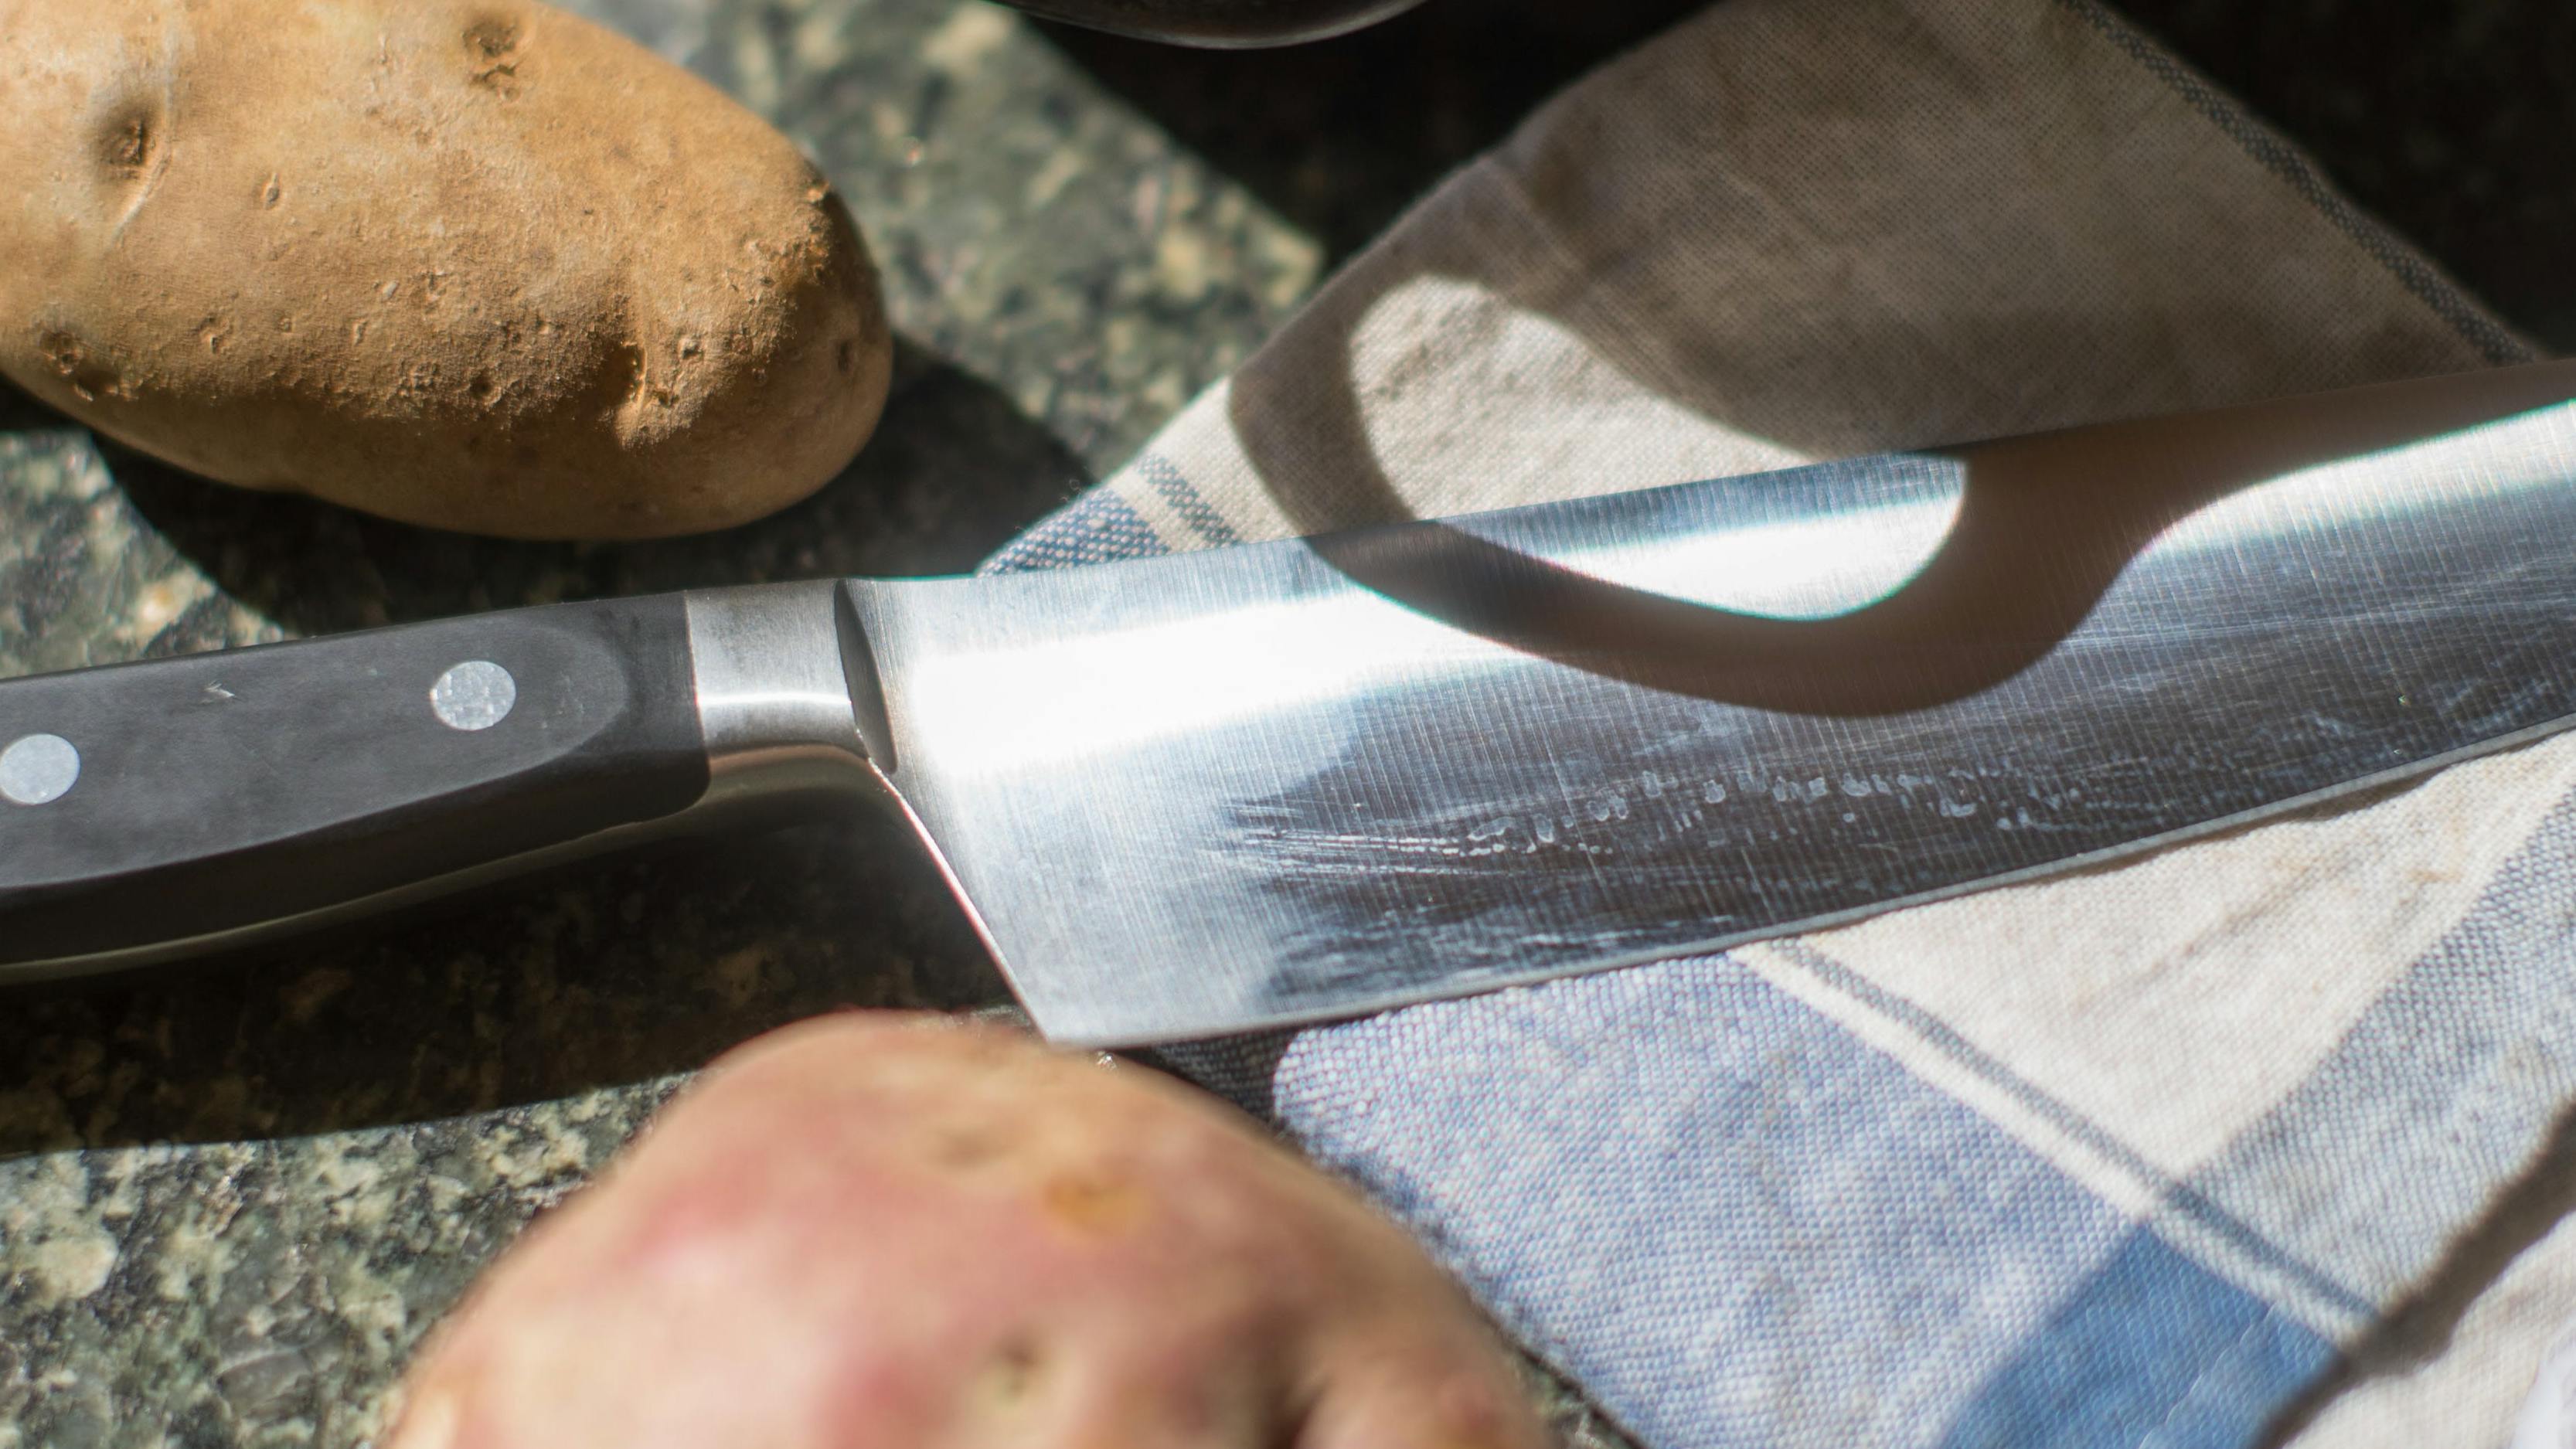 The Mercer Culinary Renaissance Forged Chef's Knife, 8 Inch lying next to some potatoes. 